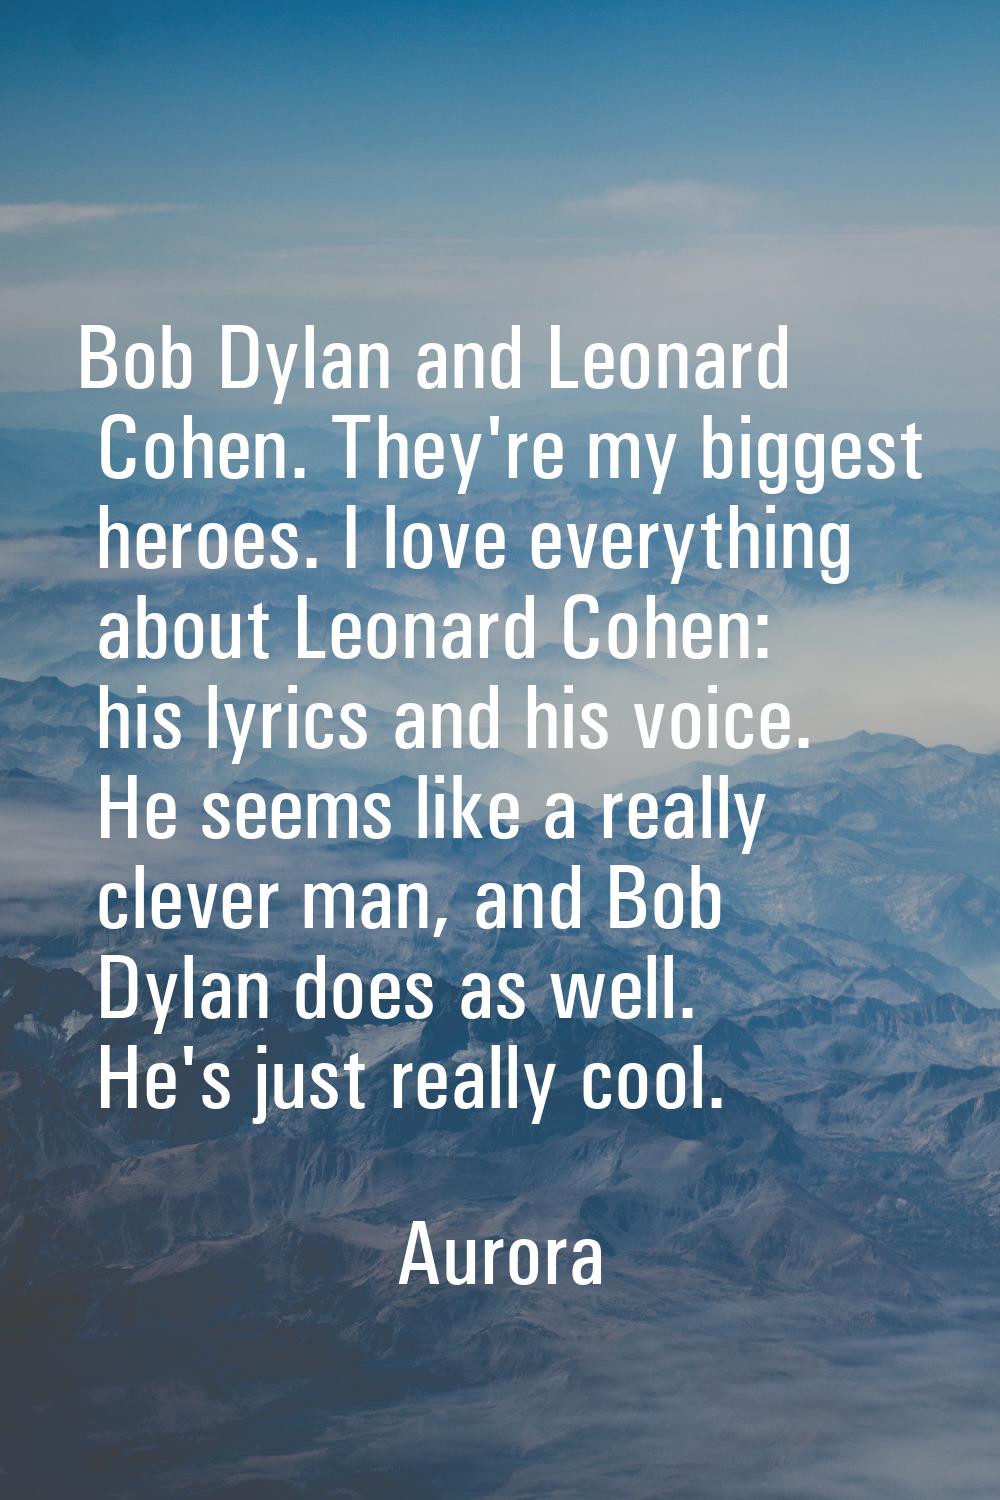 Bob Dylan and Leonard Cohen. They're my biggest heroes. I love everything about Leonard Cohen: his 